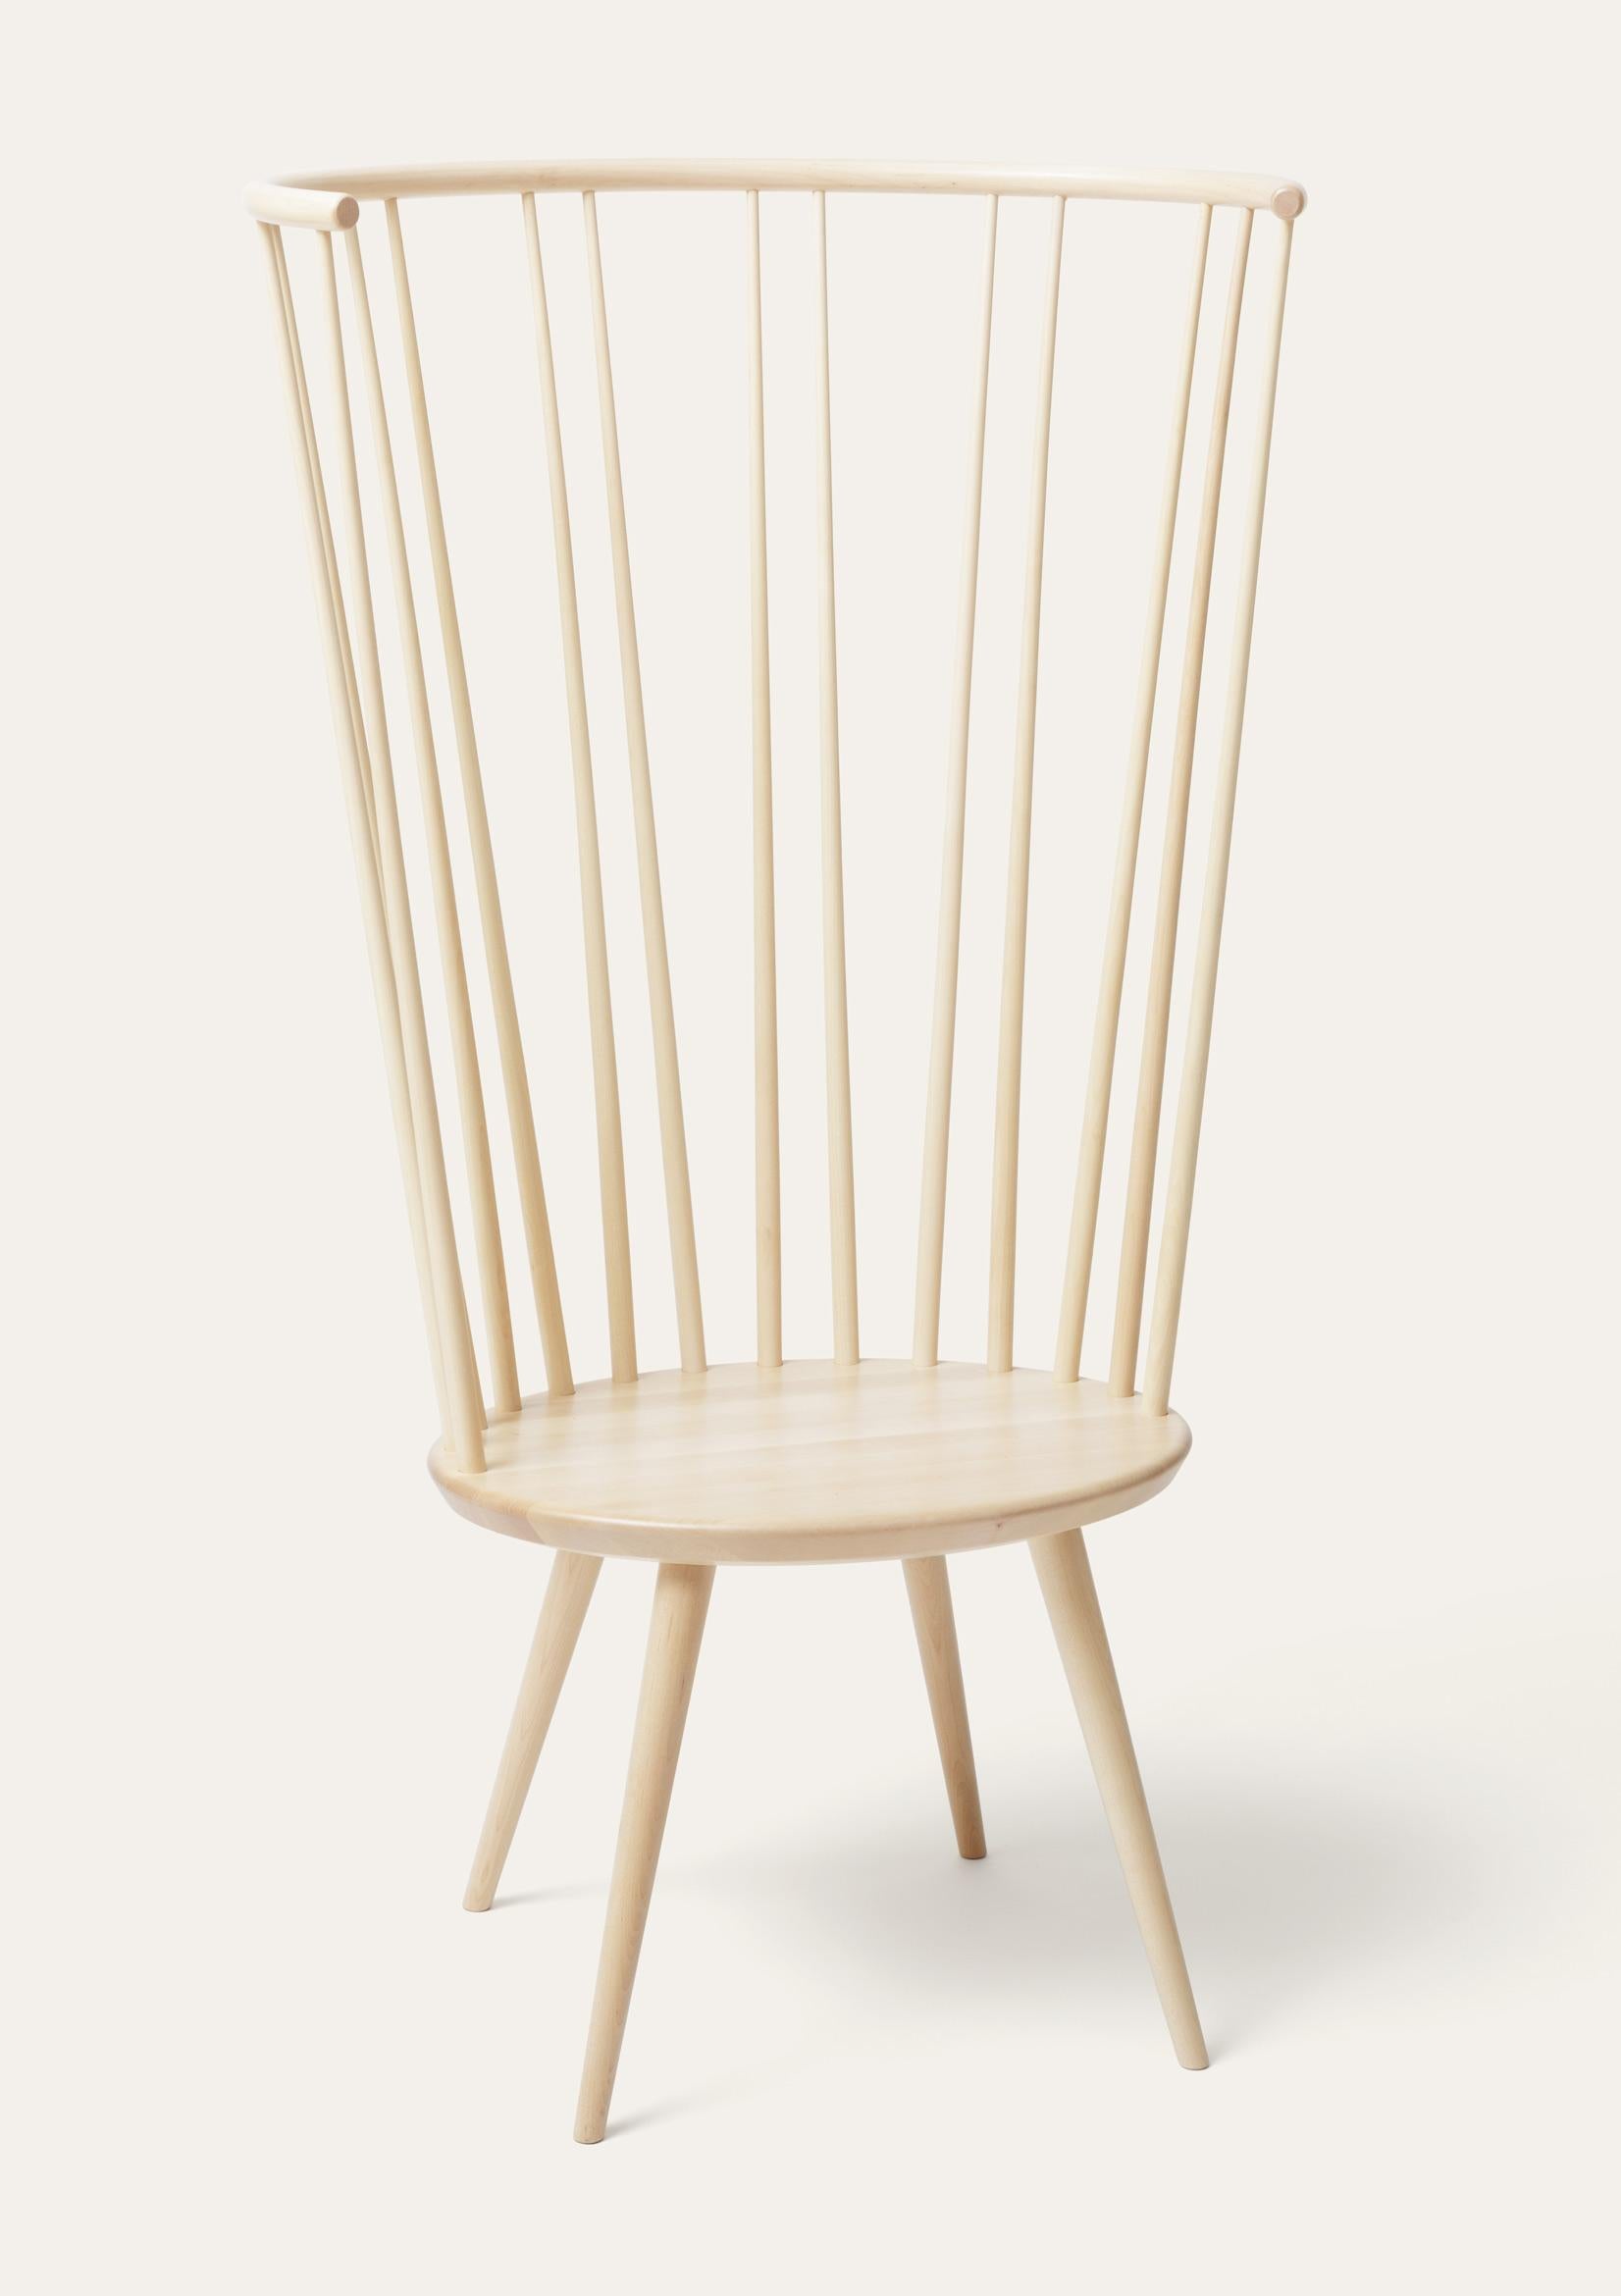 Natural Storängen birch chair by Storängen Design
Dimensions: D 56 x W 78 x H 133 x SH 42 cm
Materials: birch wood
Also available in other colors, with seat and back cushion.

The Storängen chair epitomizes our belief in the honesty of